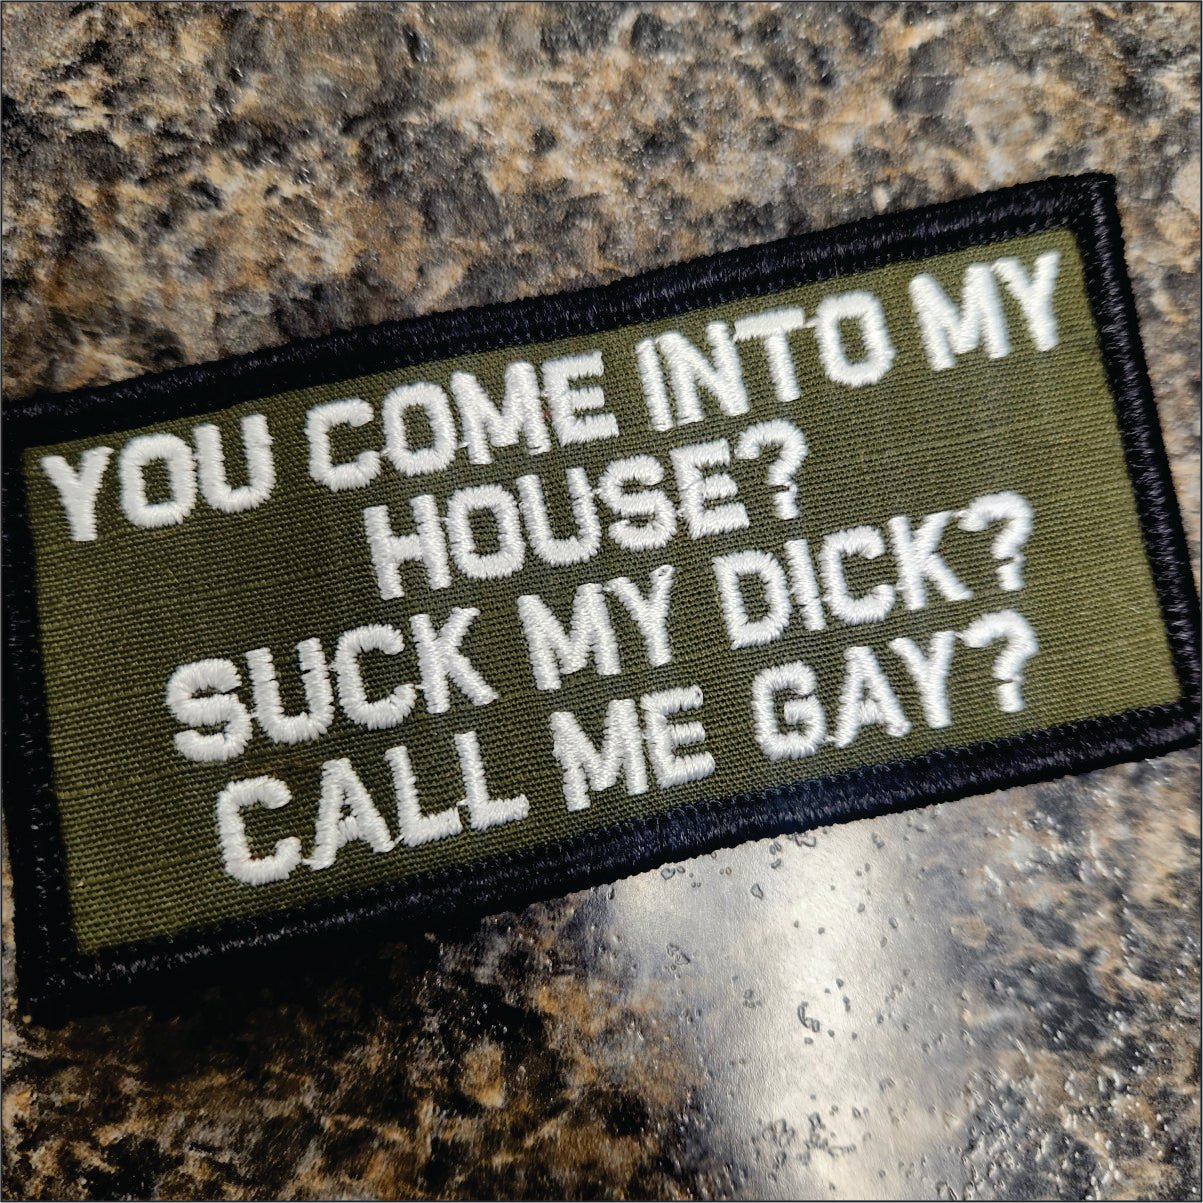 As Seen on Socials - You come to my House? Suck my Dick? Call me Gay? - 2x4 Patch - Olive Drab w/White